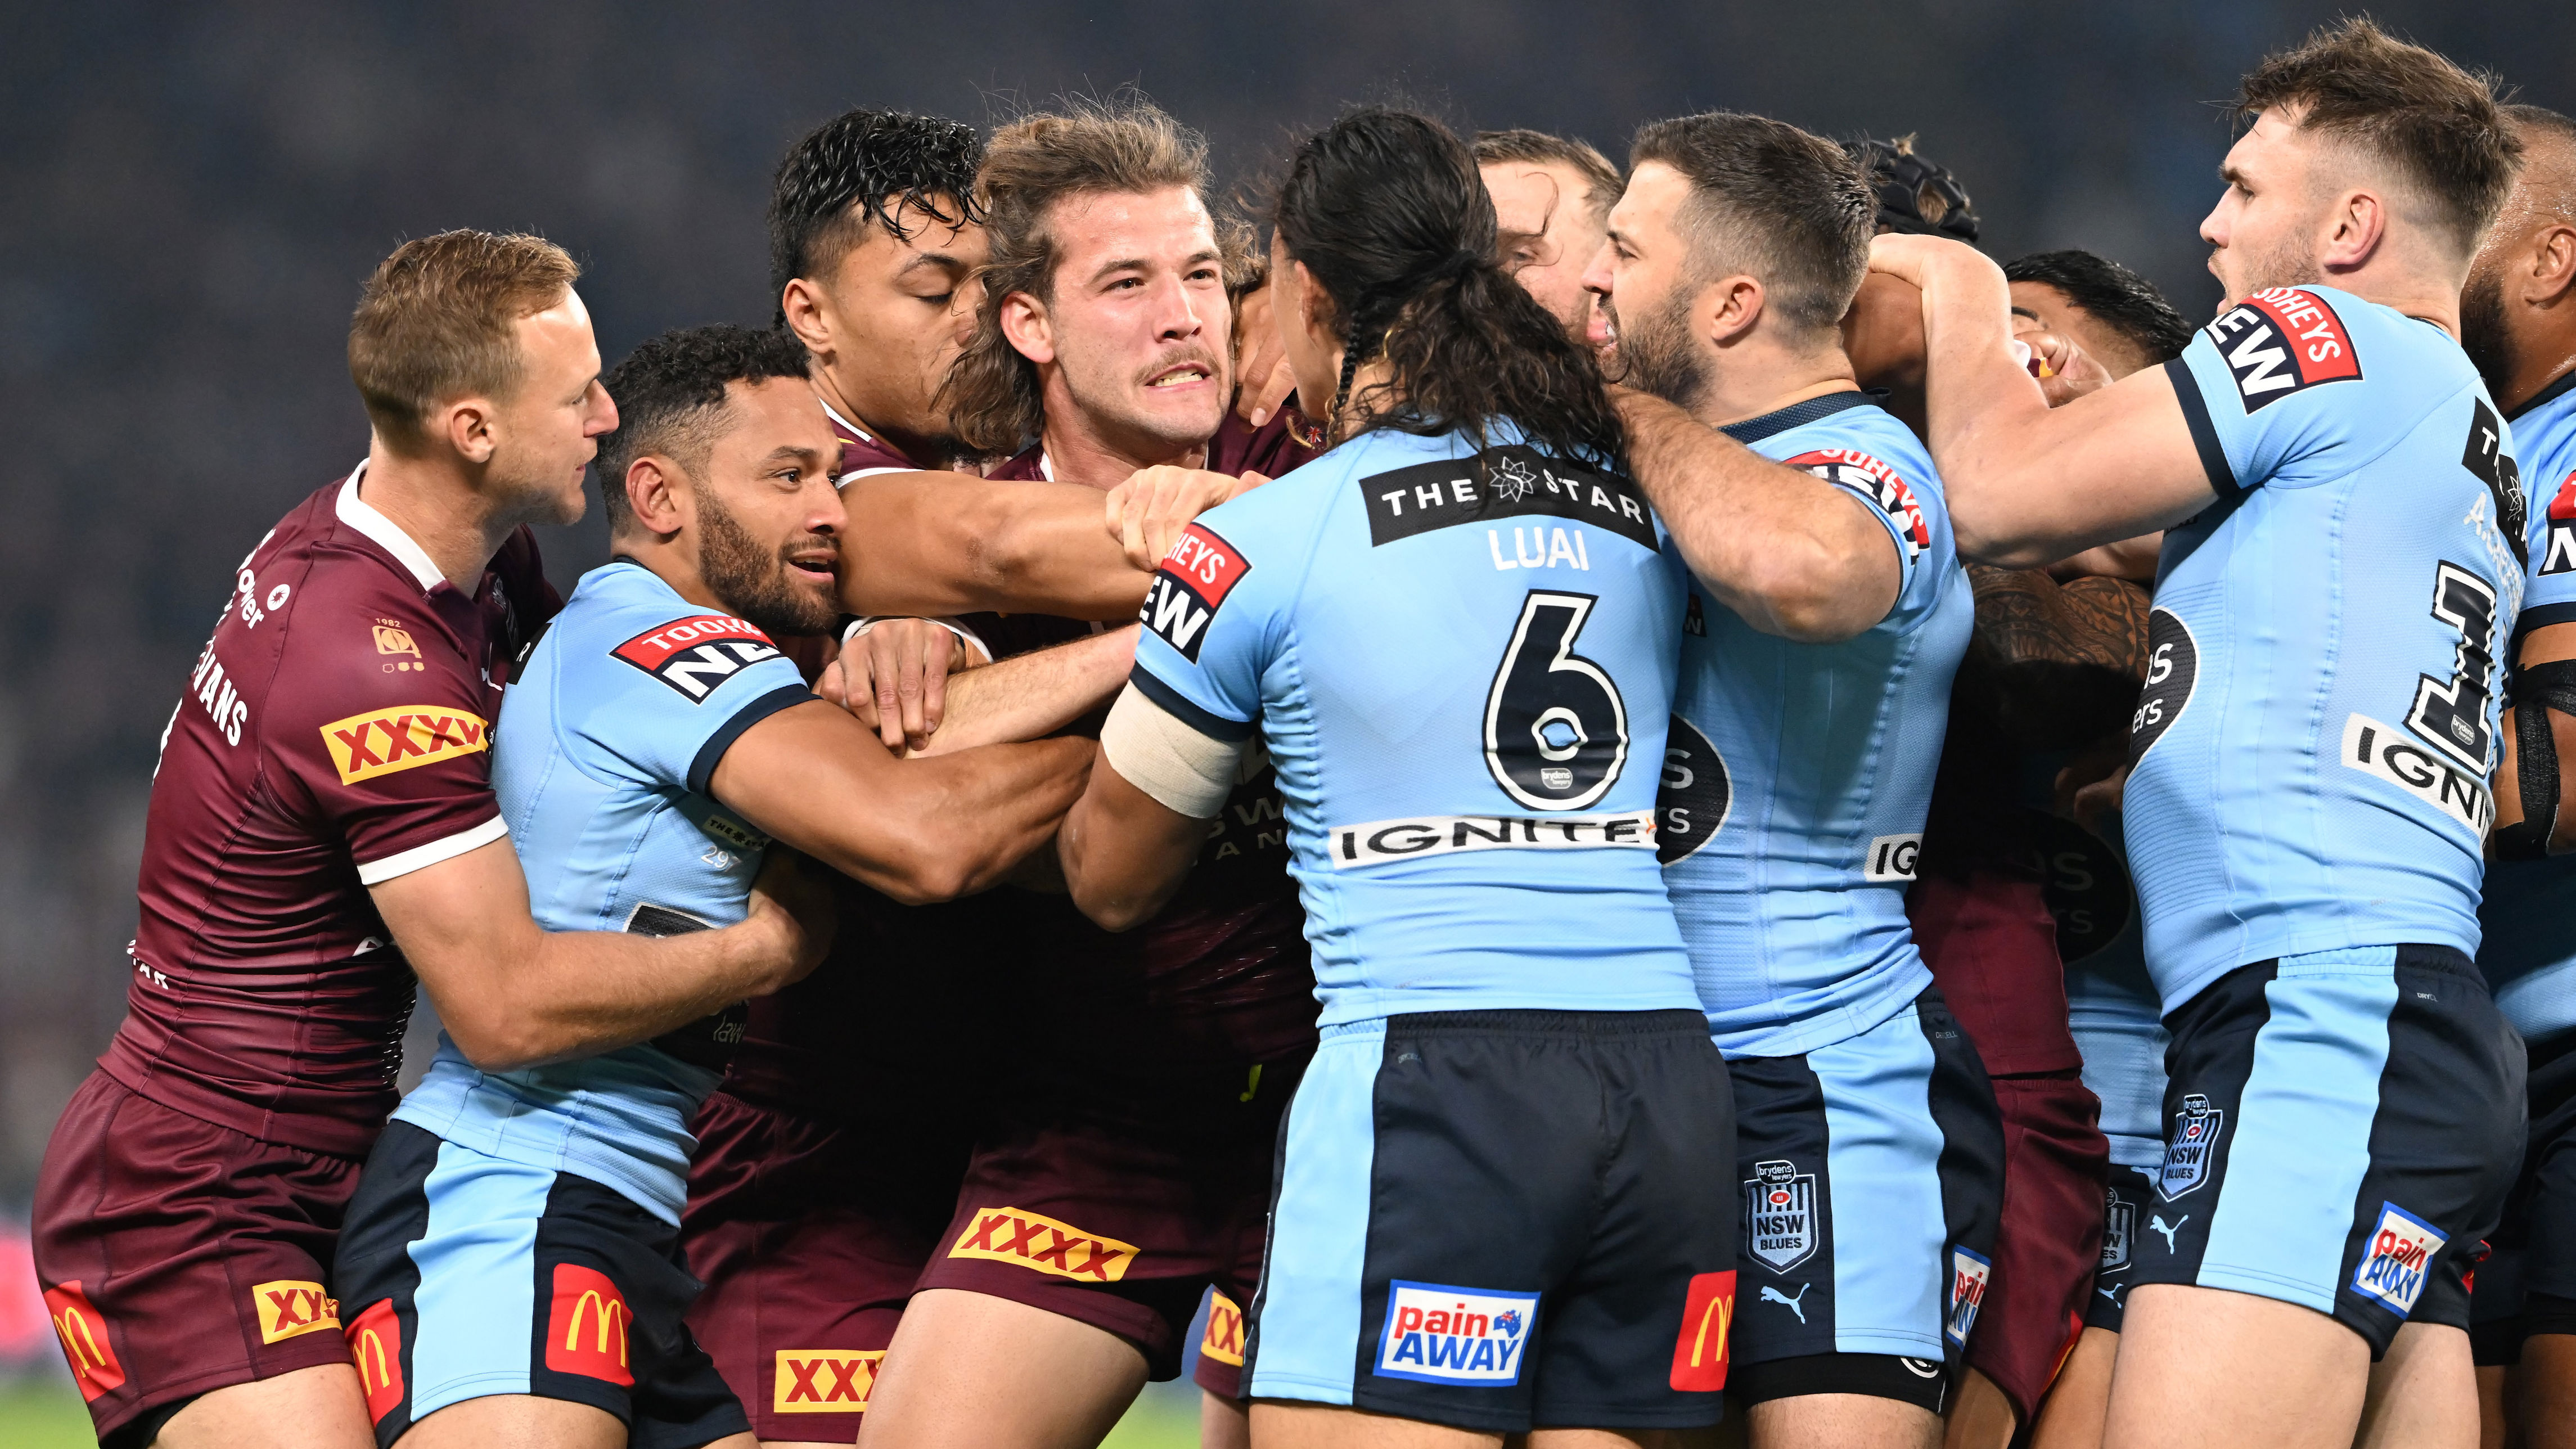 State of Origin When is Game 3? Start time, kickoff, TV channel for